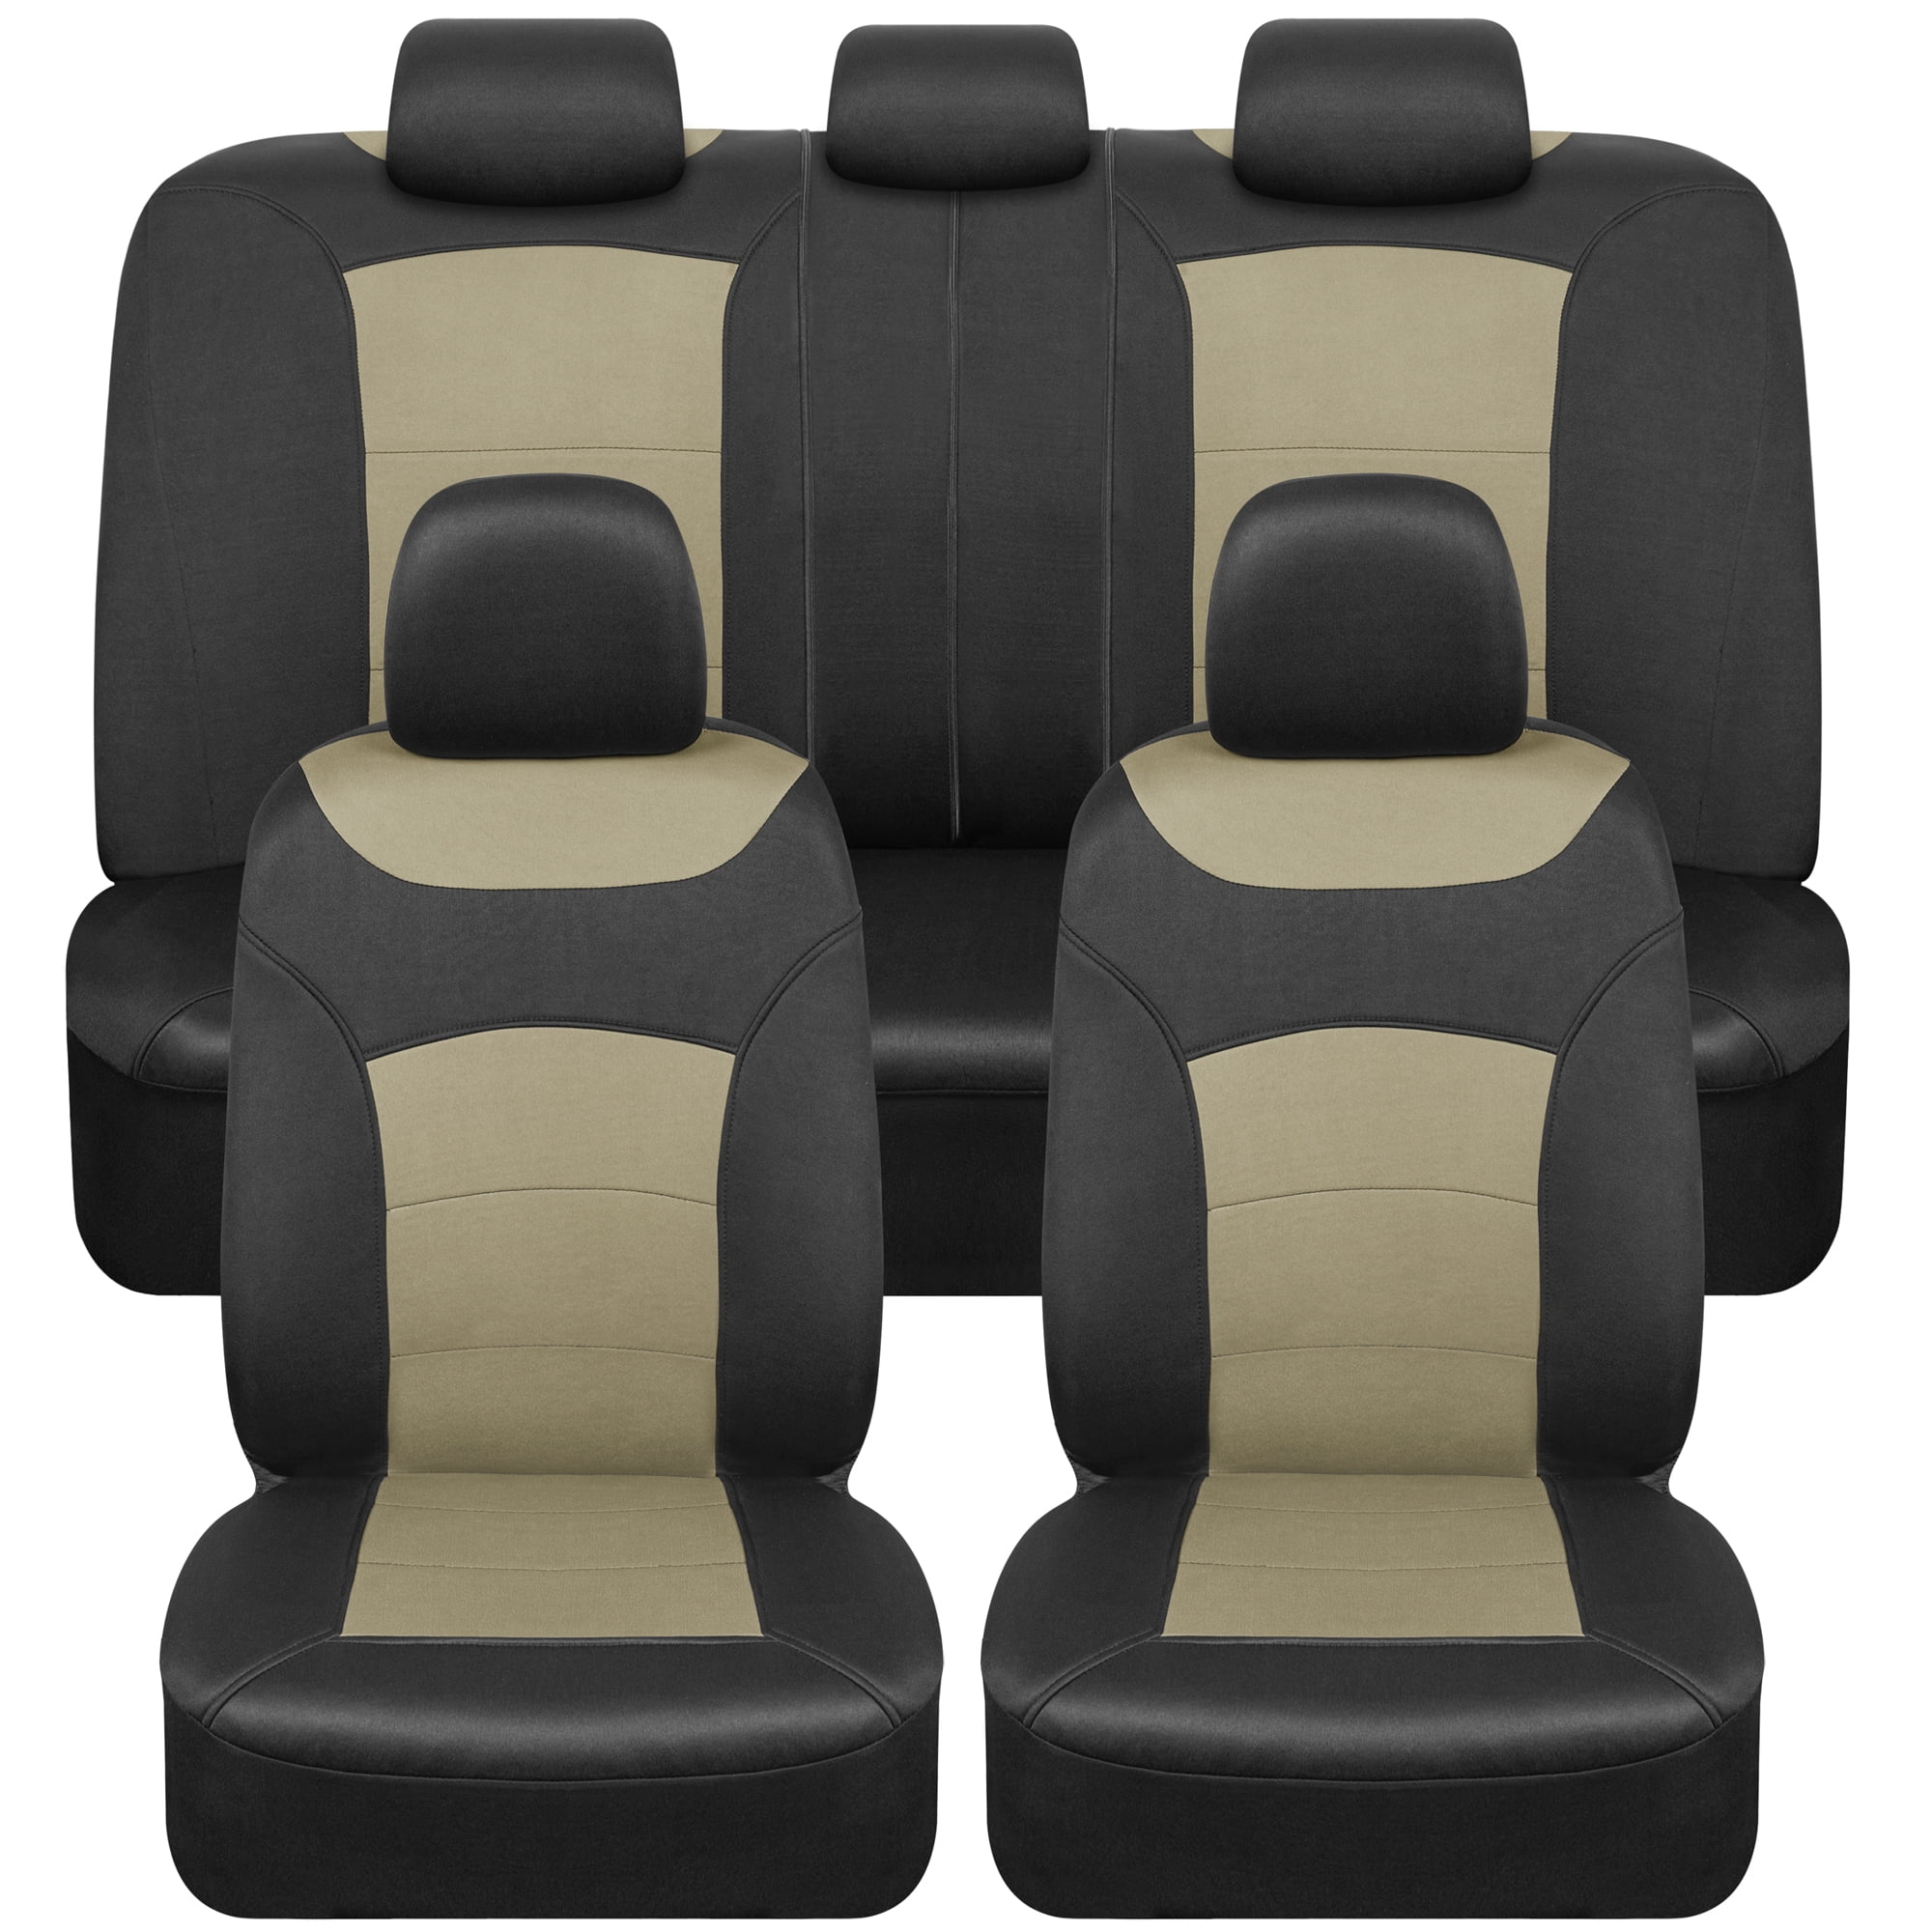 Carxs Turismo Black Car Seat Covers Full Set, Two-Tone Front Seat Covers for Cars with Split Rear Bench Back Seat Cover, Automotive Interior Covers OS339